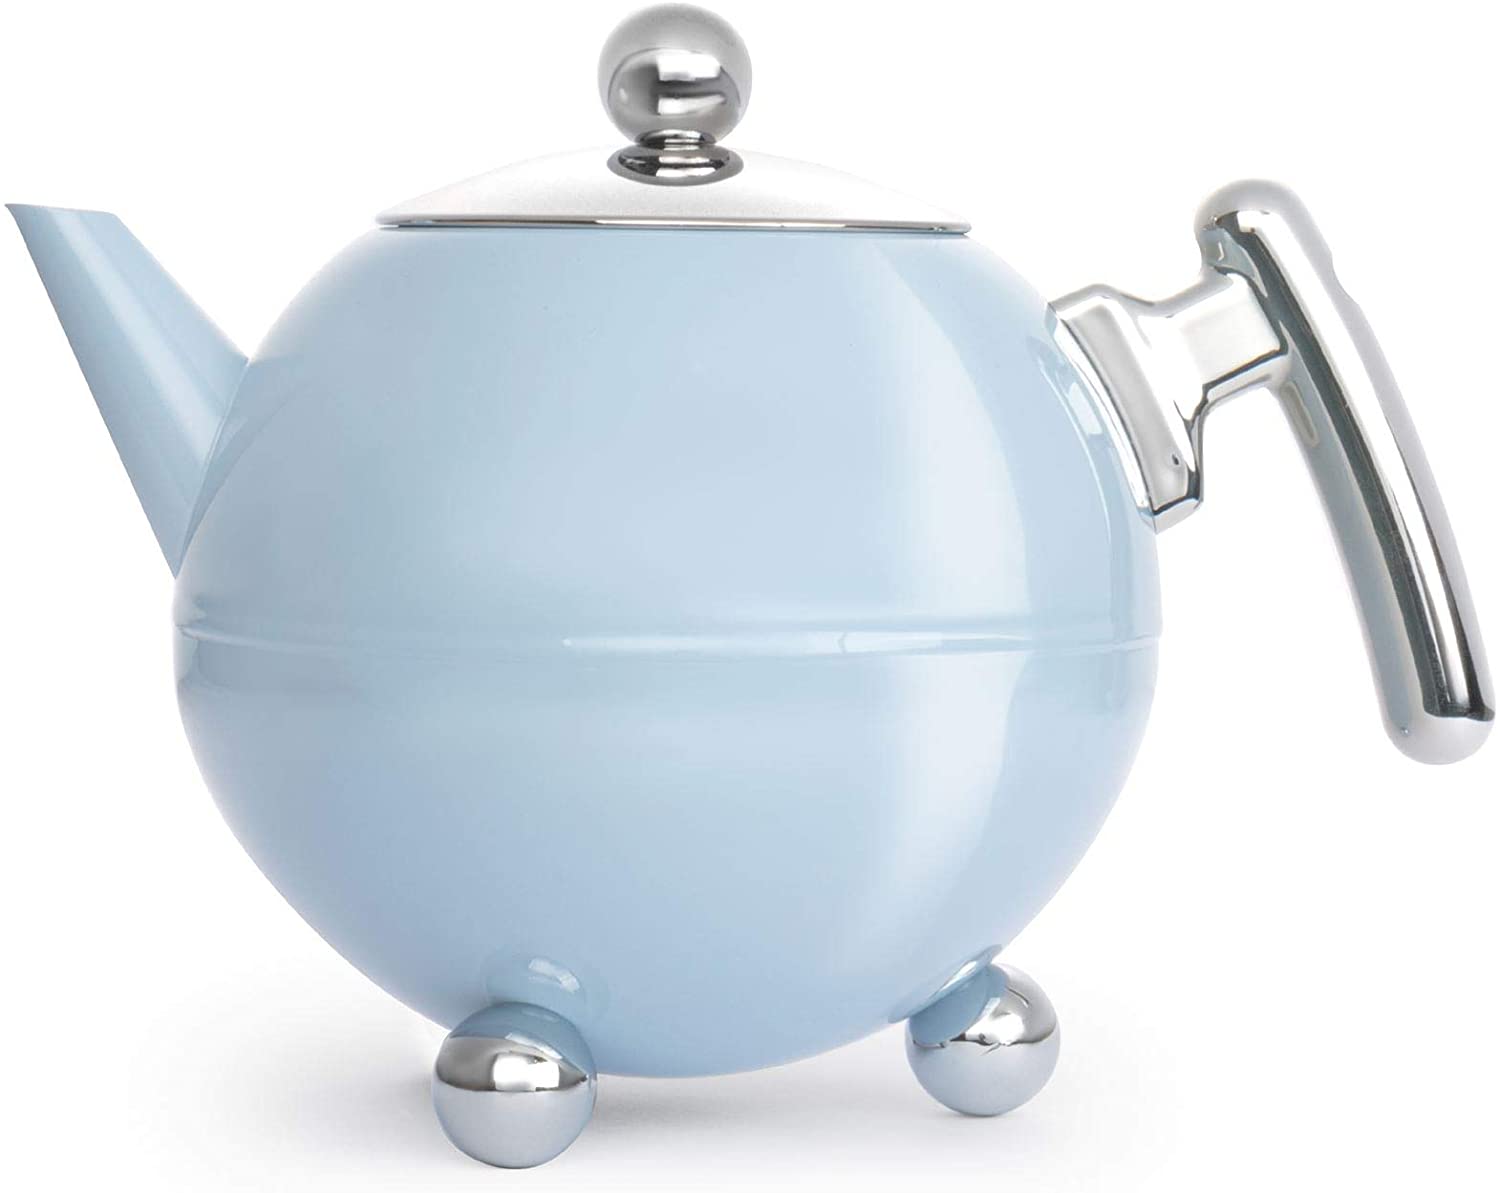 Bredemeijer Bella Ronde Teapot Blue Chrome Fittings 1.2 L Stainless Steel 16.1 x 24.8 x 18.1 cm